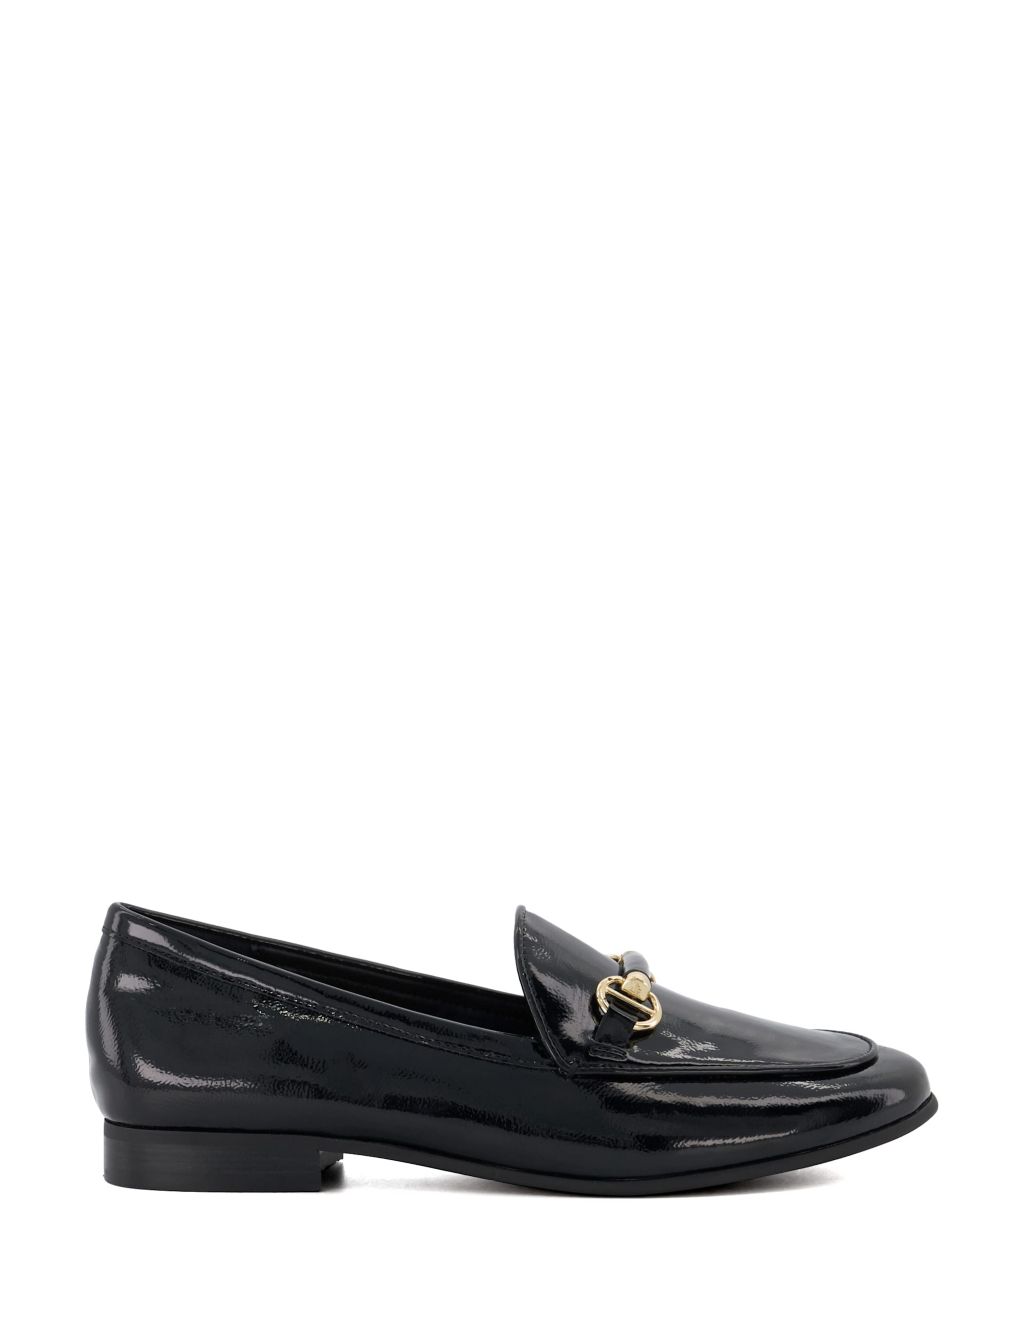 Leather Bar Trim Flat Loafers image 1